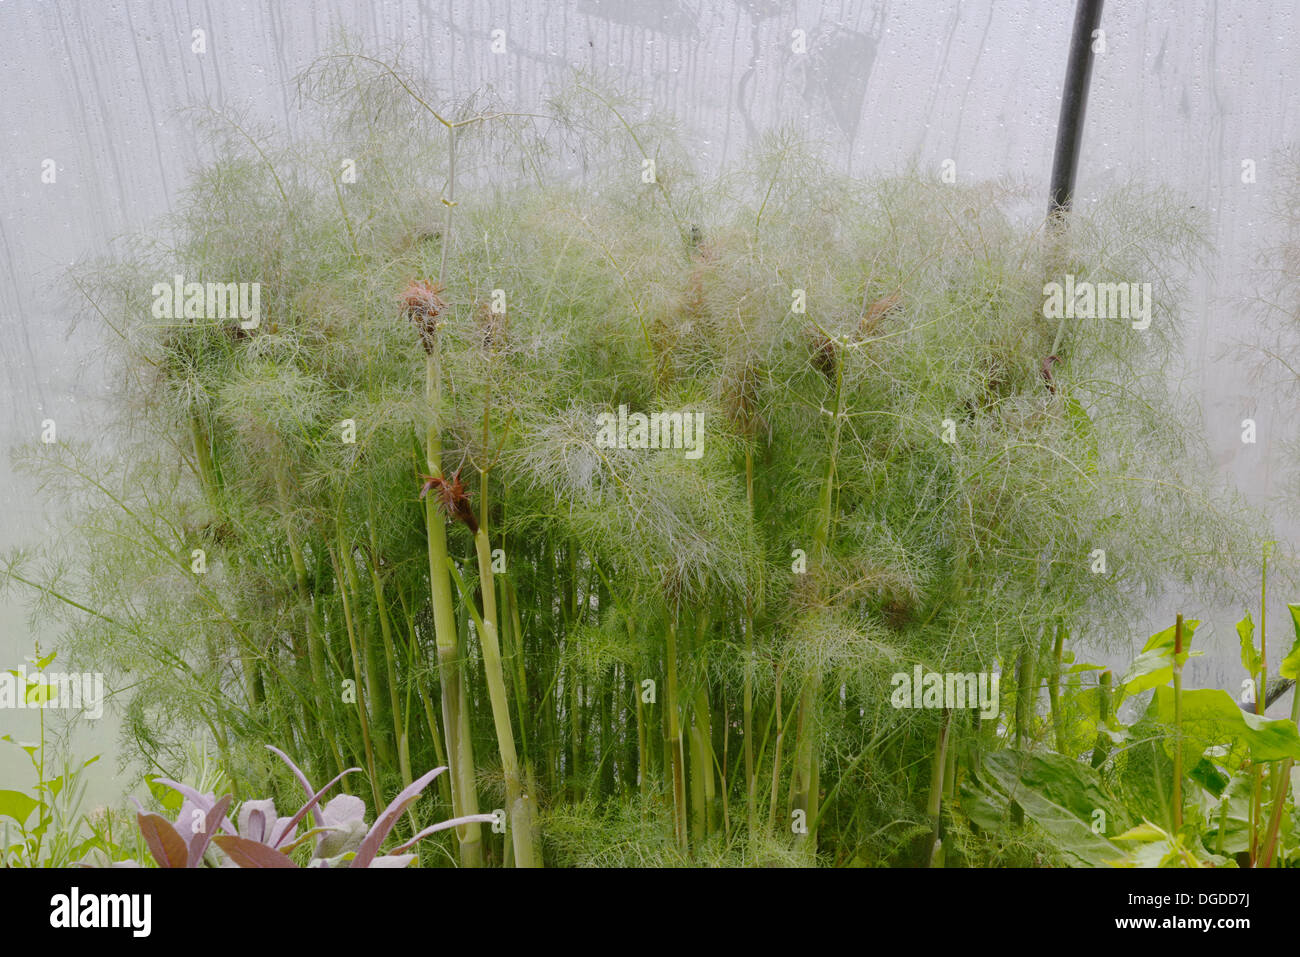 Foeniculum vulgare 'Purpureum', Bronze Fennel growing in a polytunnel in Spring, Wales, UK. Stock Photo